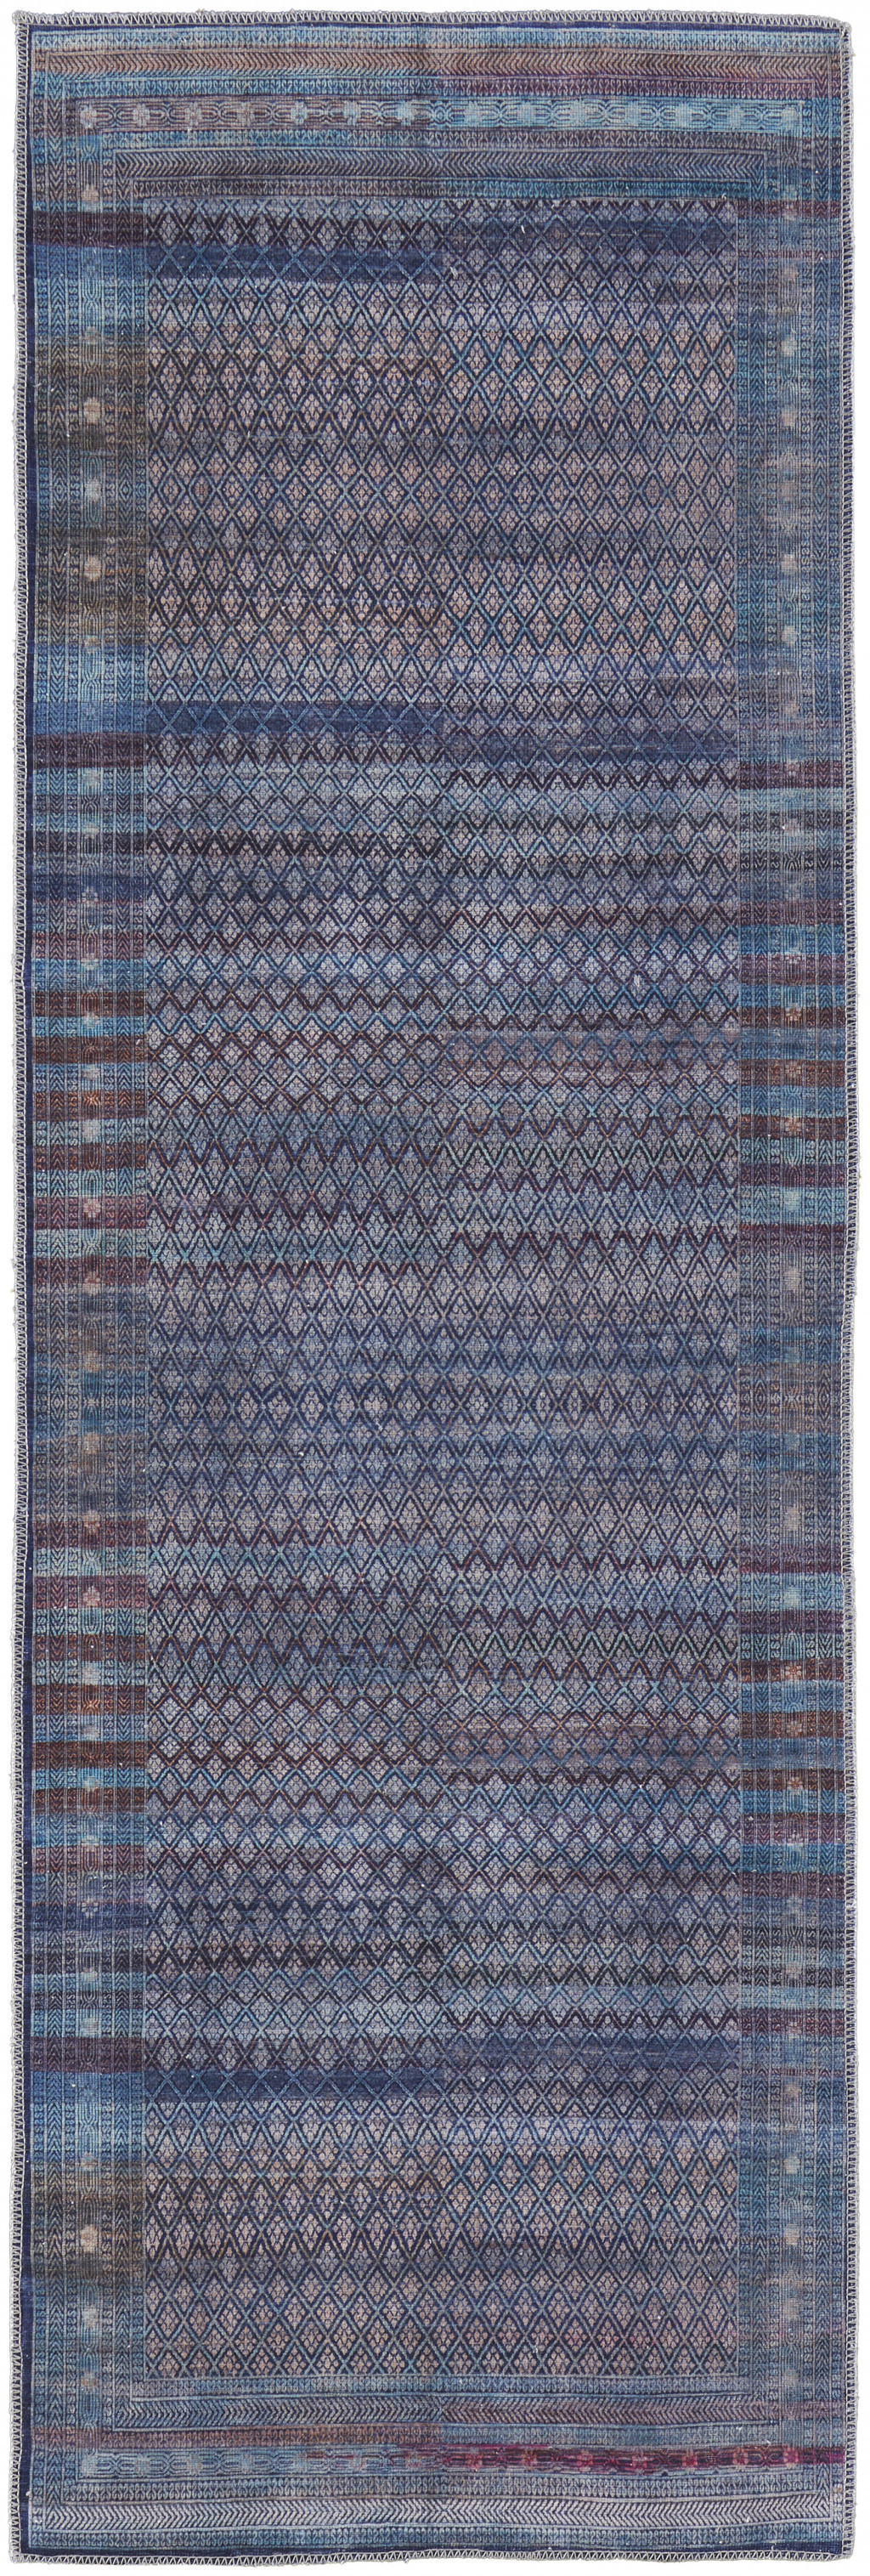 8' Tan Blue And Pink Striped Power Loom Runner Rug-515208-1